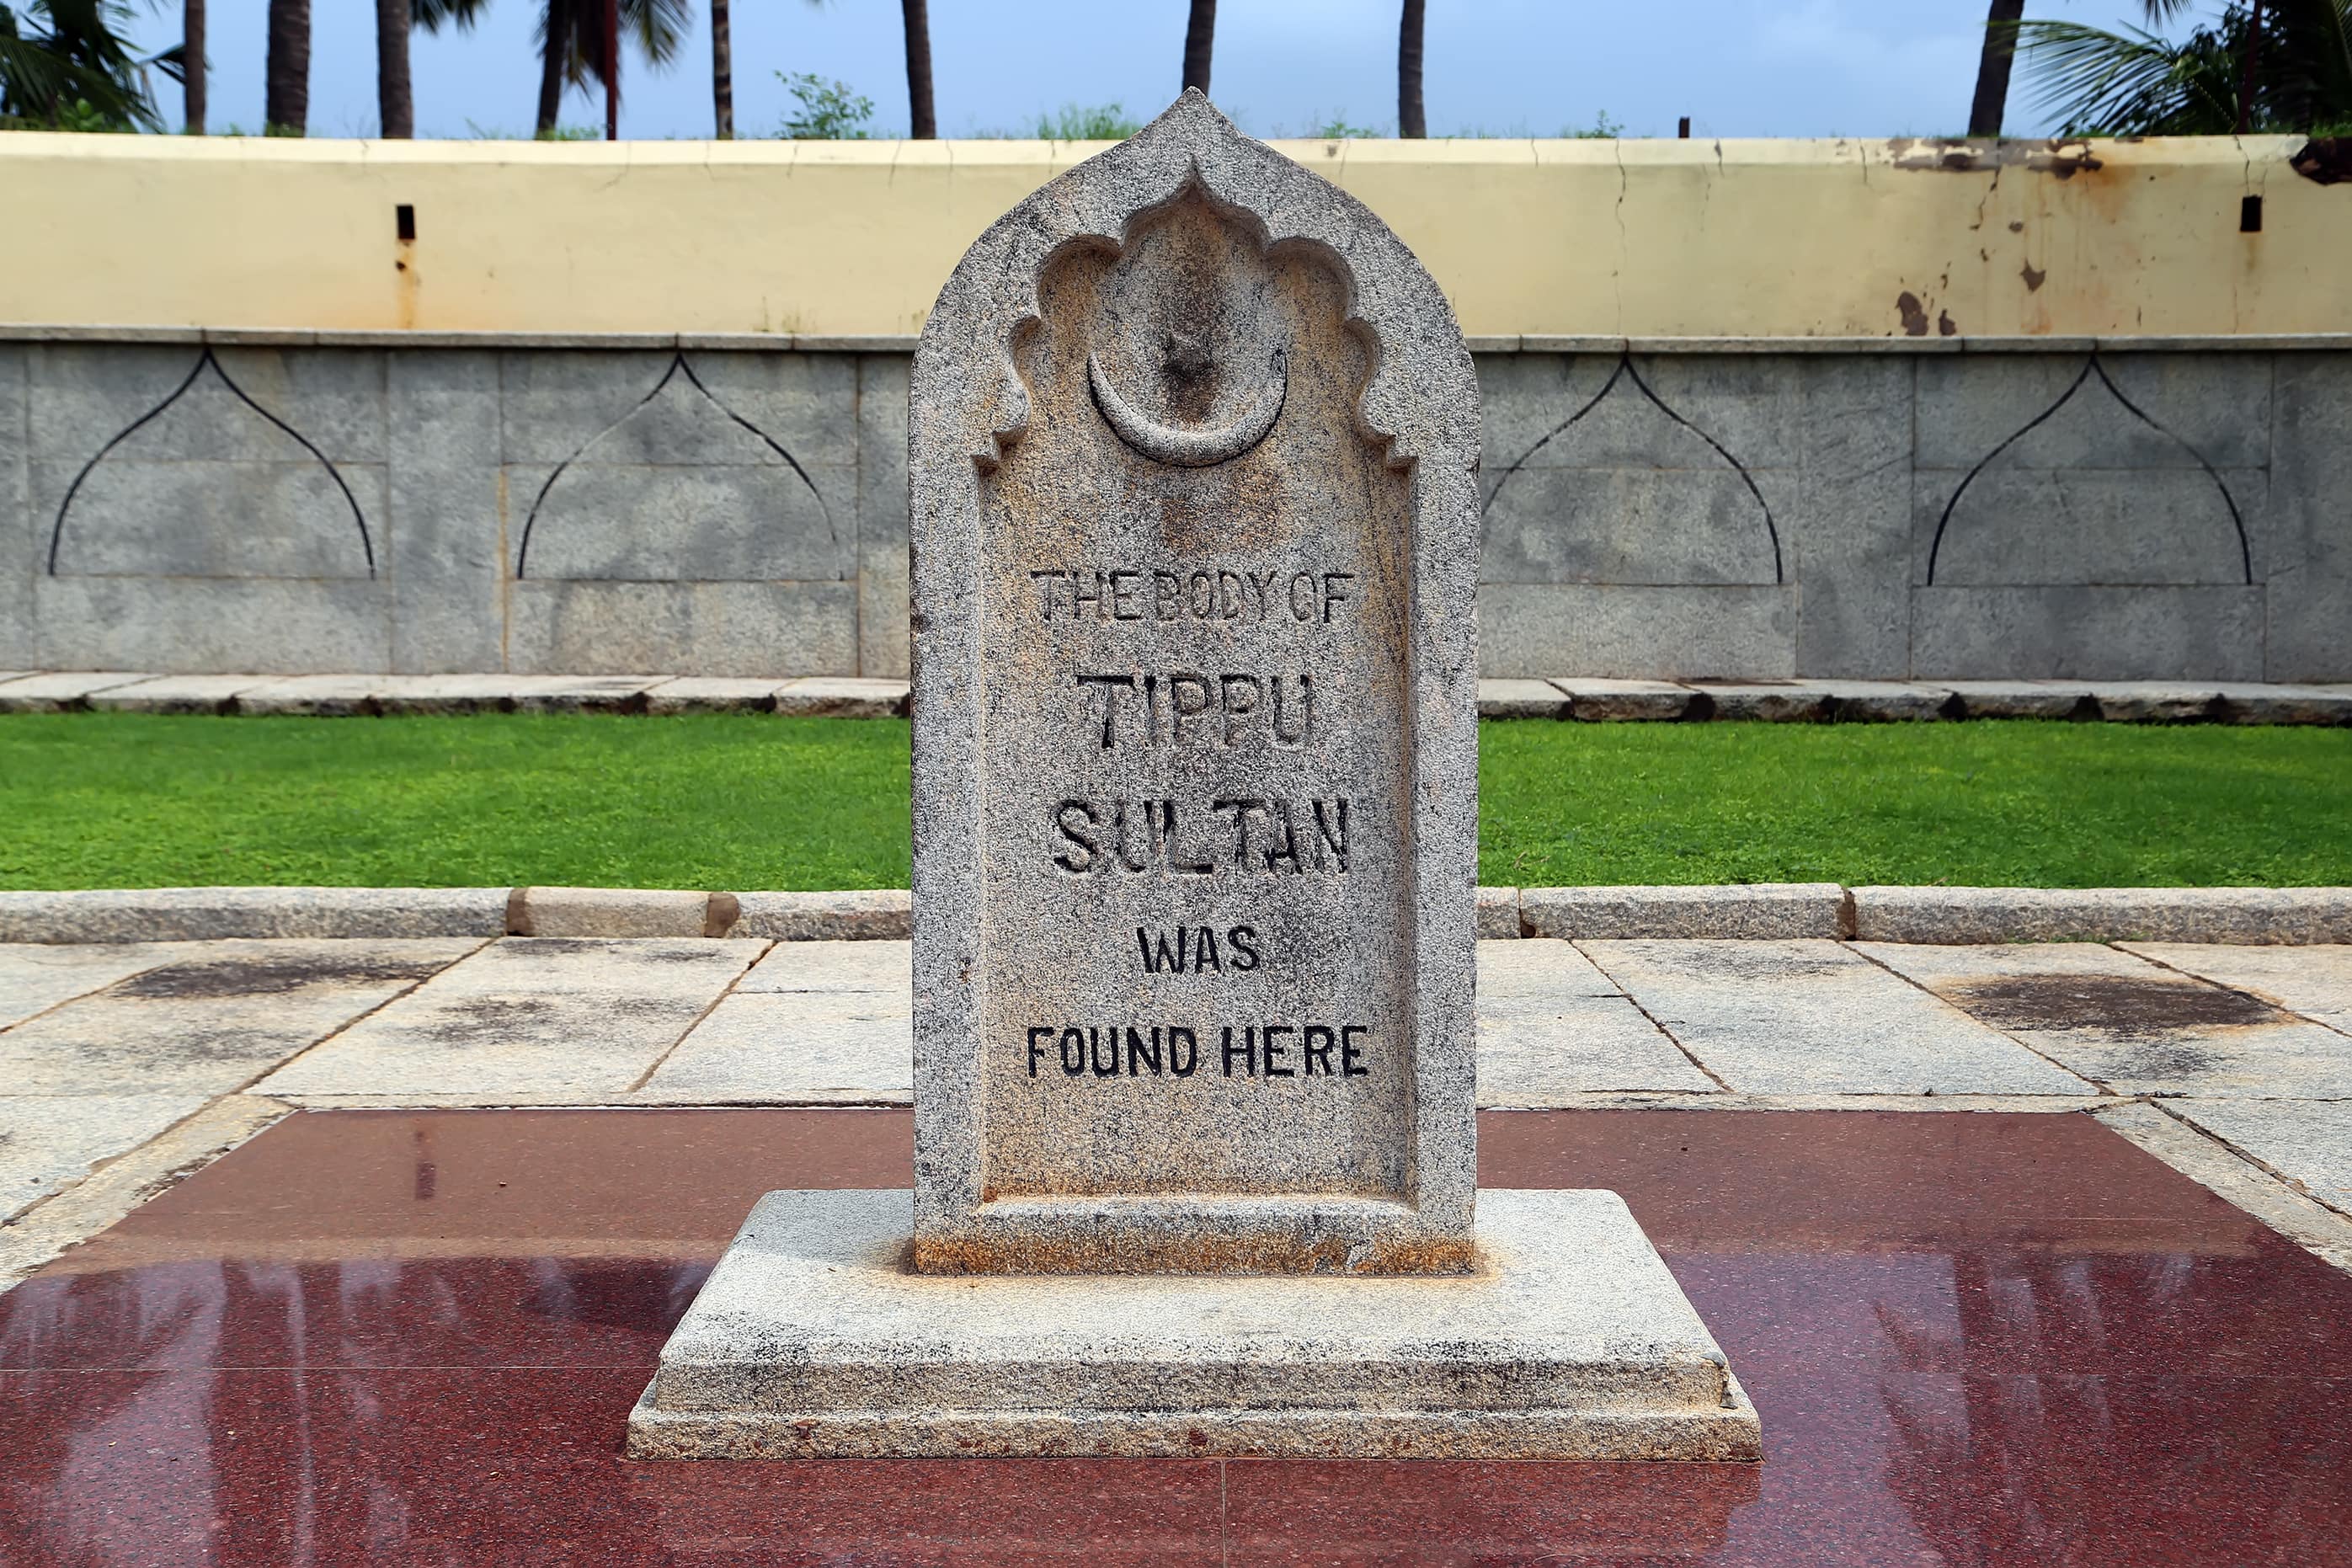 Tipu Sultan five unknown facts about the Muslim tyrant who rebuild hindu temples